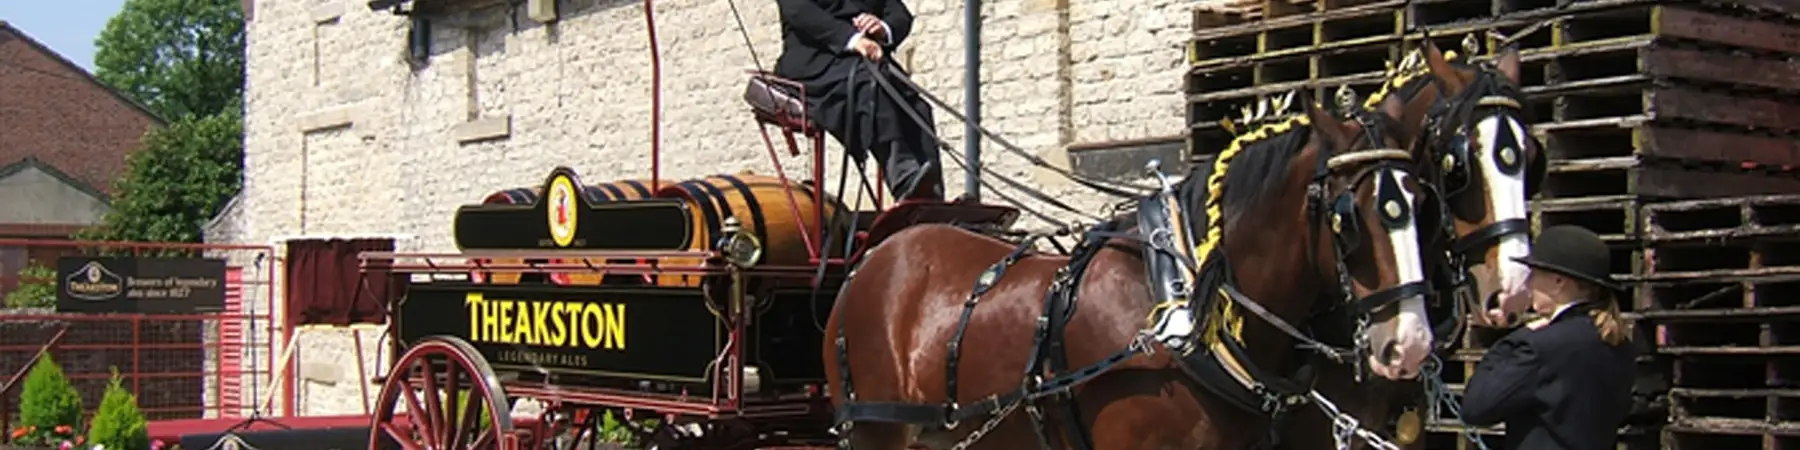 horse drawn carriage with Theakston brewery logo on side